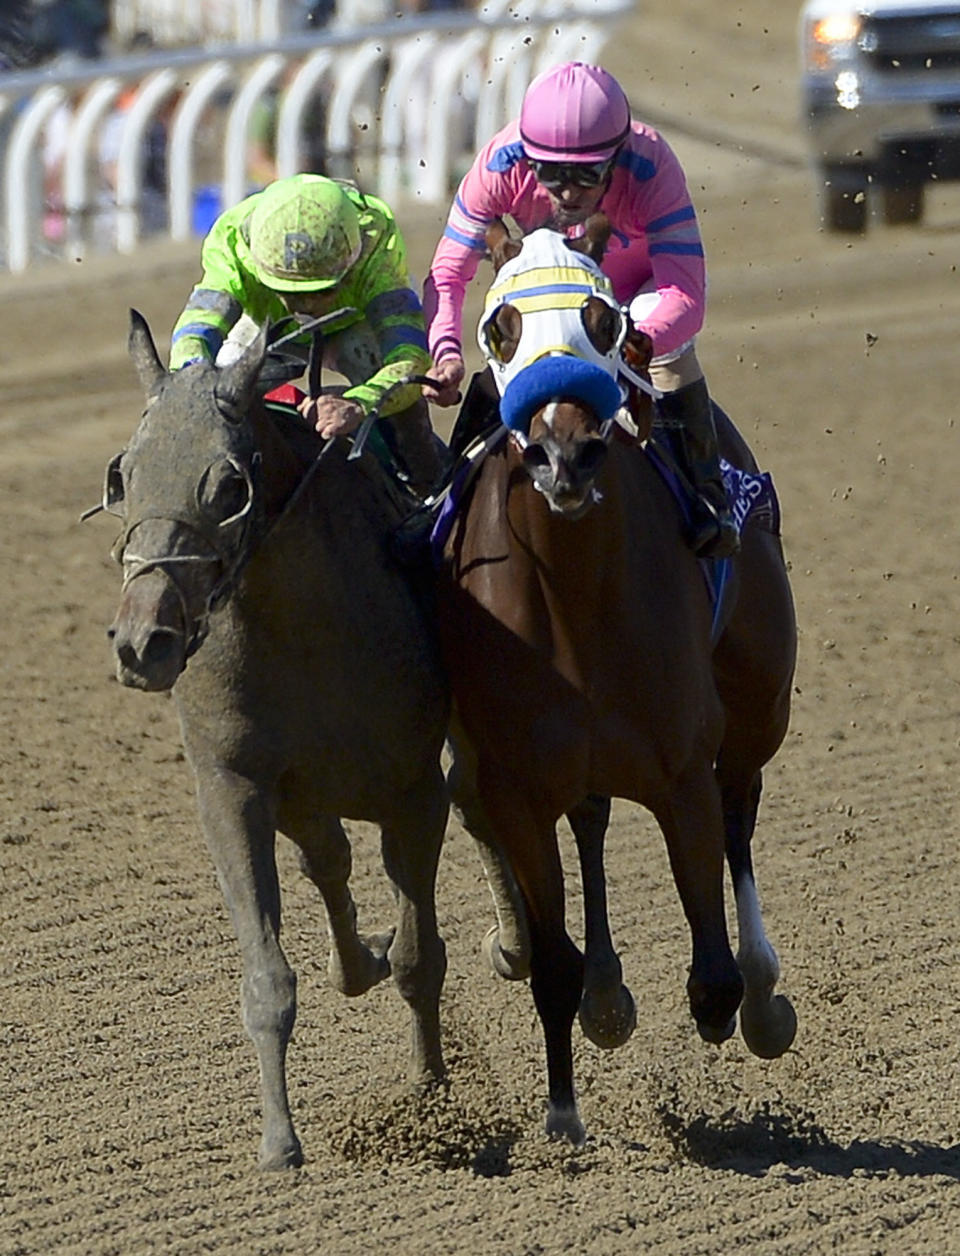 File- This Nov. 2, 2013, file photo shows Ria Antonia, left, with jockey Javier Castellano aboard winning the Breeders' Cup Juvenile Fillies horse race at Santa Anita Park in Arcadia, Calif. A filly is going to challenge the boys in the Preakness for the first time since 2009 when Rachel Alexandra won. Ria Antonia will be ridden by Calvin Borel, who guided Rachel Alexandra to victory. Ria Antonia is coming off a sixth-place finish in the Kentucky Oaks on May 2 at Churchill Downs, where she has been training. (AP Photo/Mark J. Terrill, File)